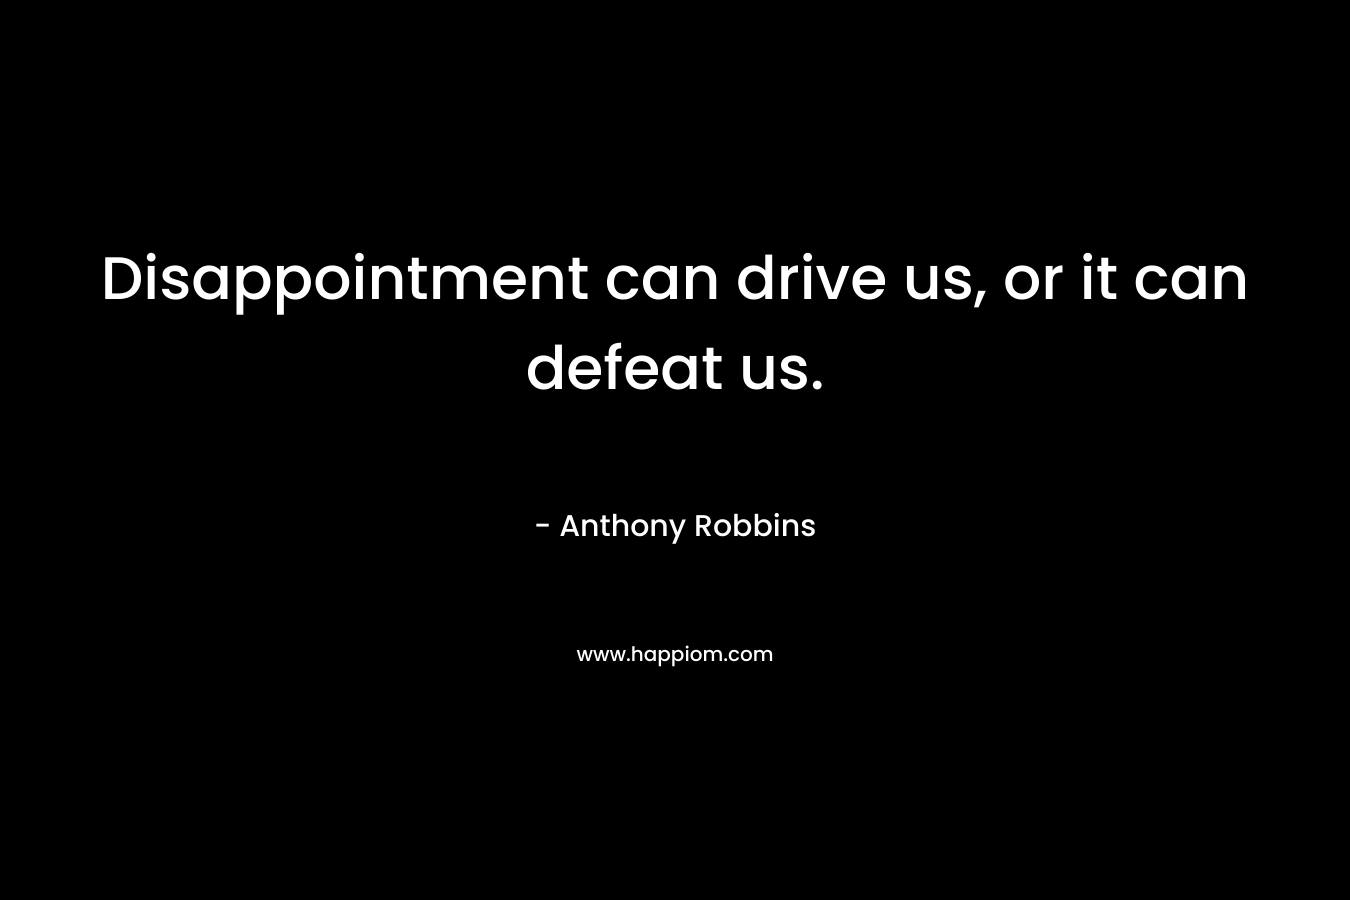 Disappointment can drive us, or it can defeat us. – Anthony Robbins